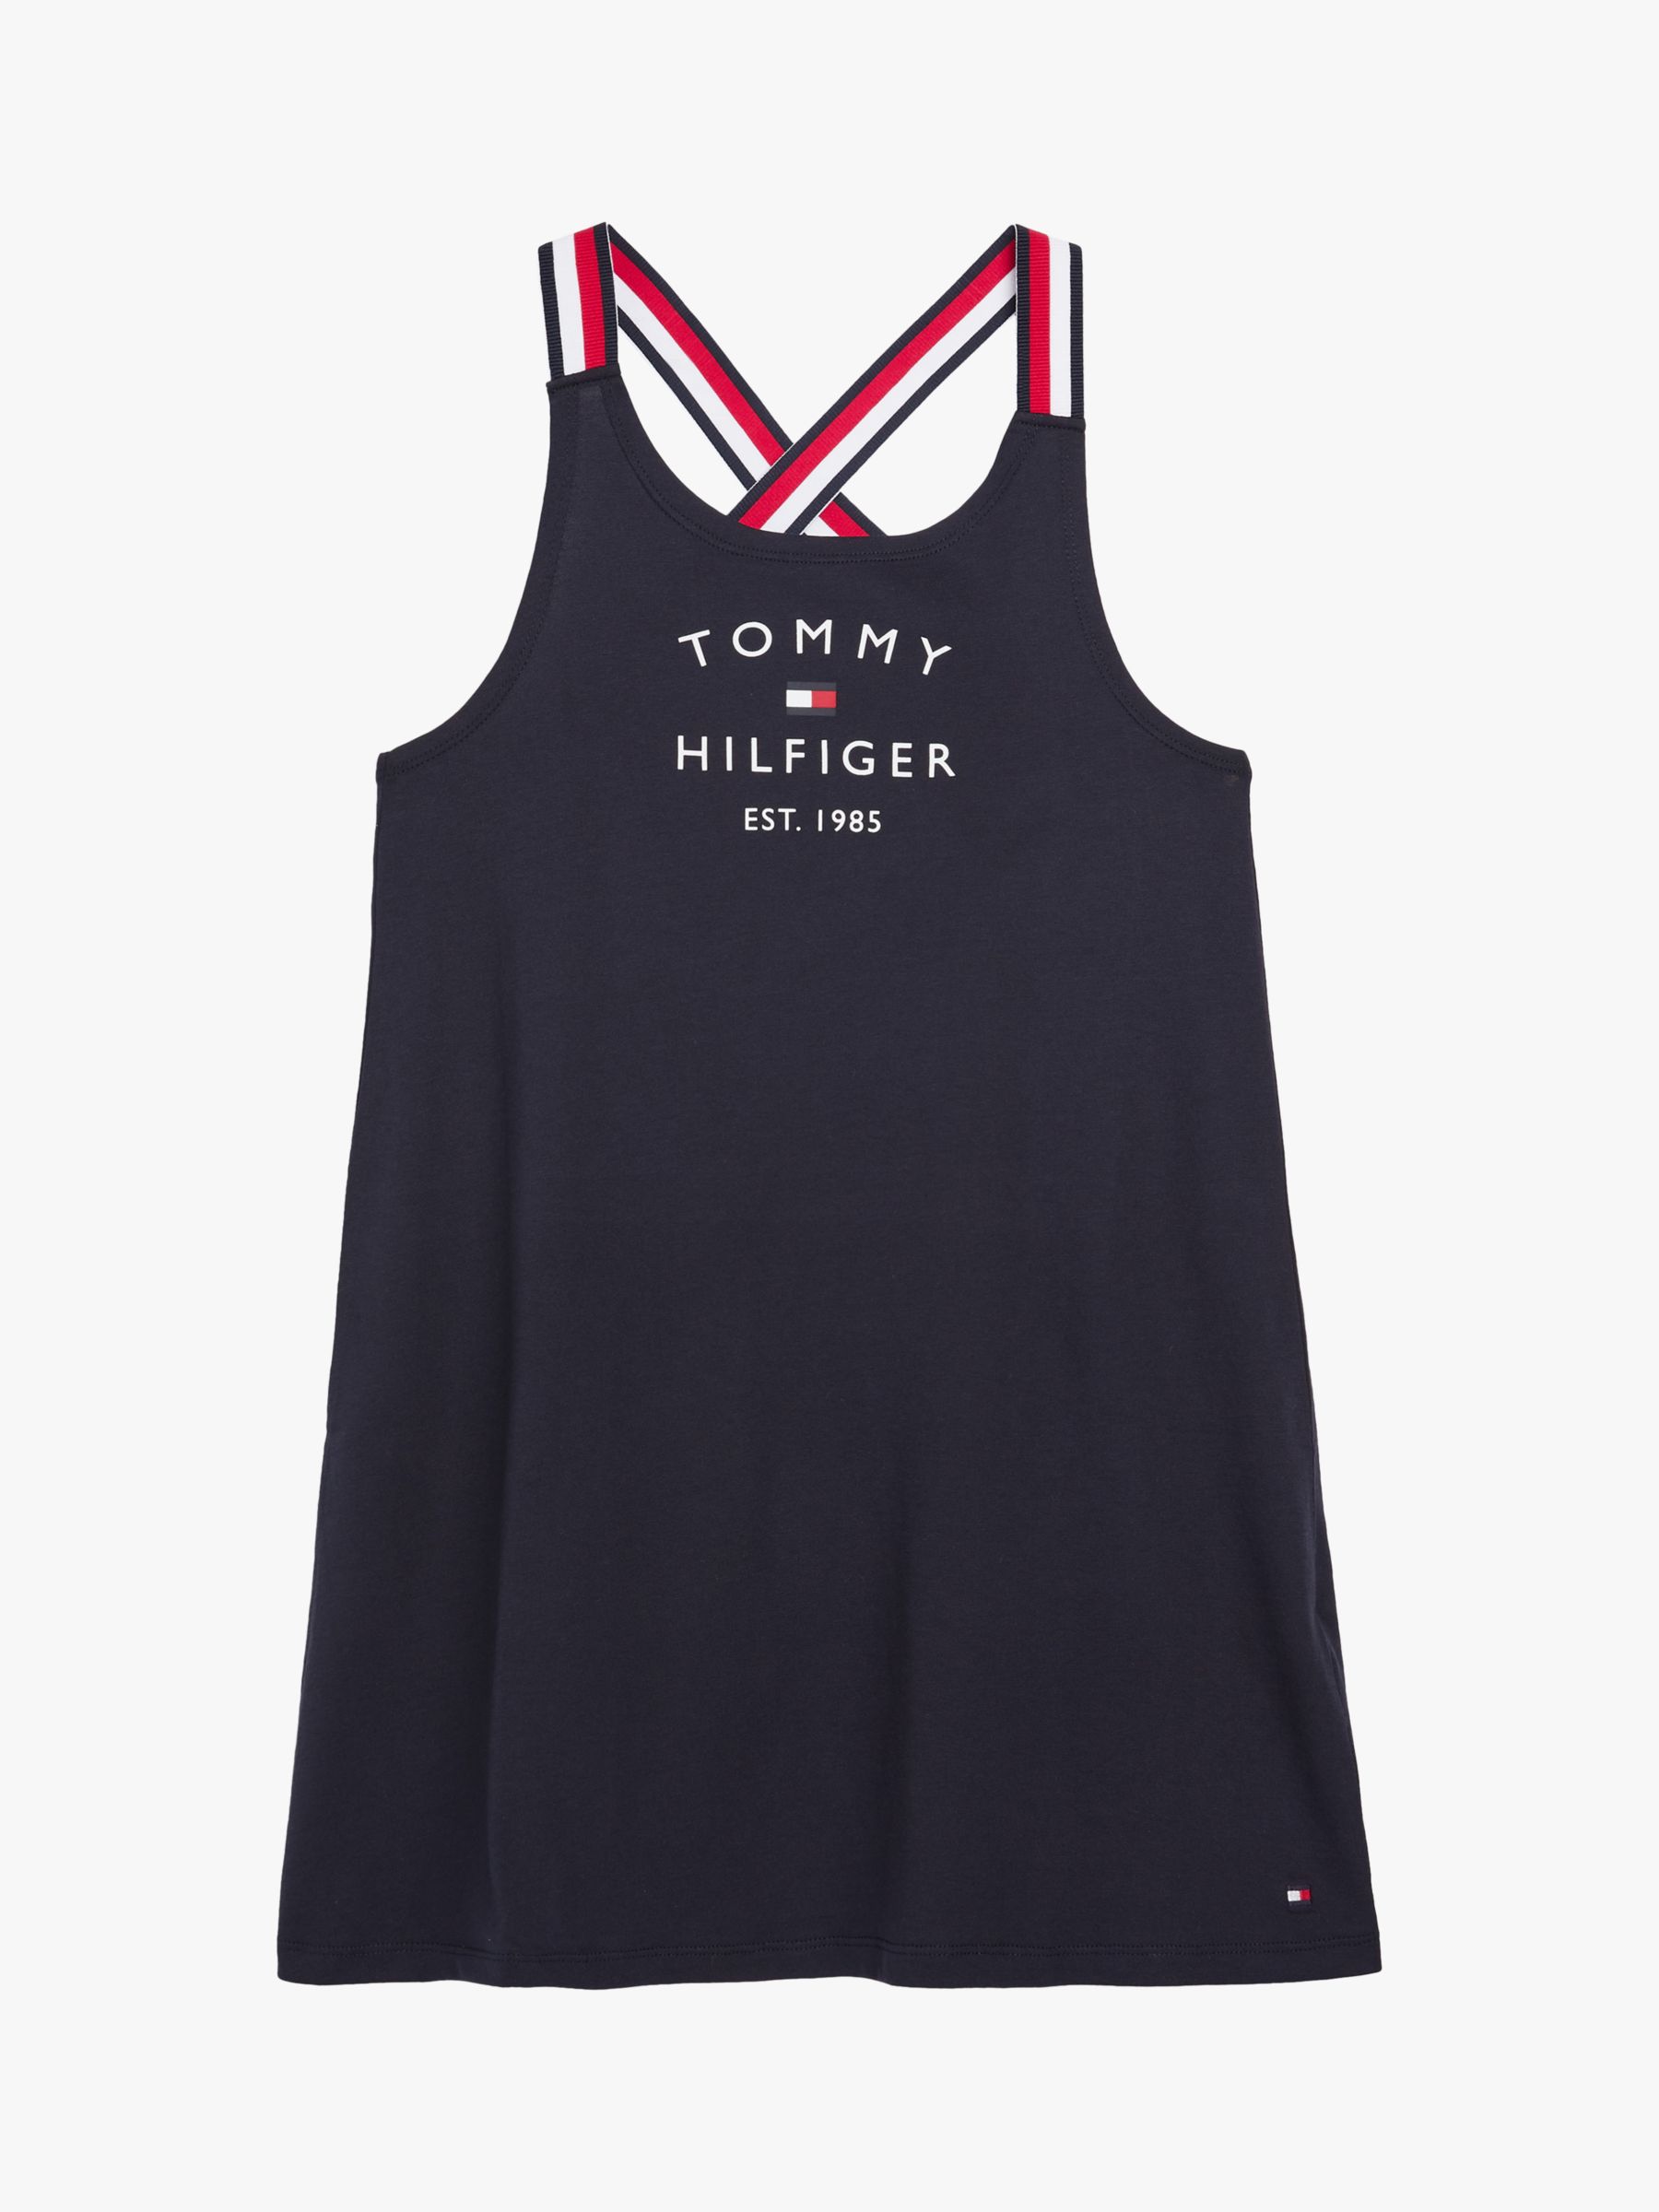 Tommy Hilfiger Strappy Scoop Neck Bra  Tommy hilfiger outfit, Teen fashion  outfits, Beach outfit